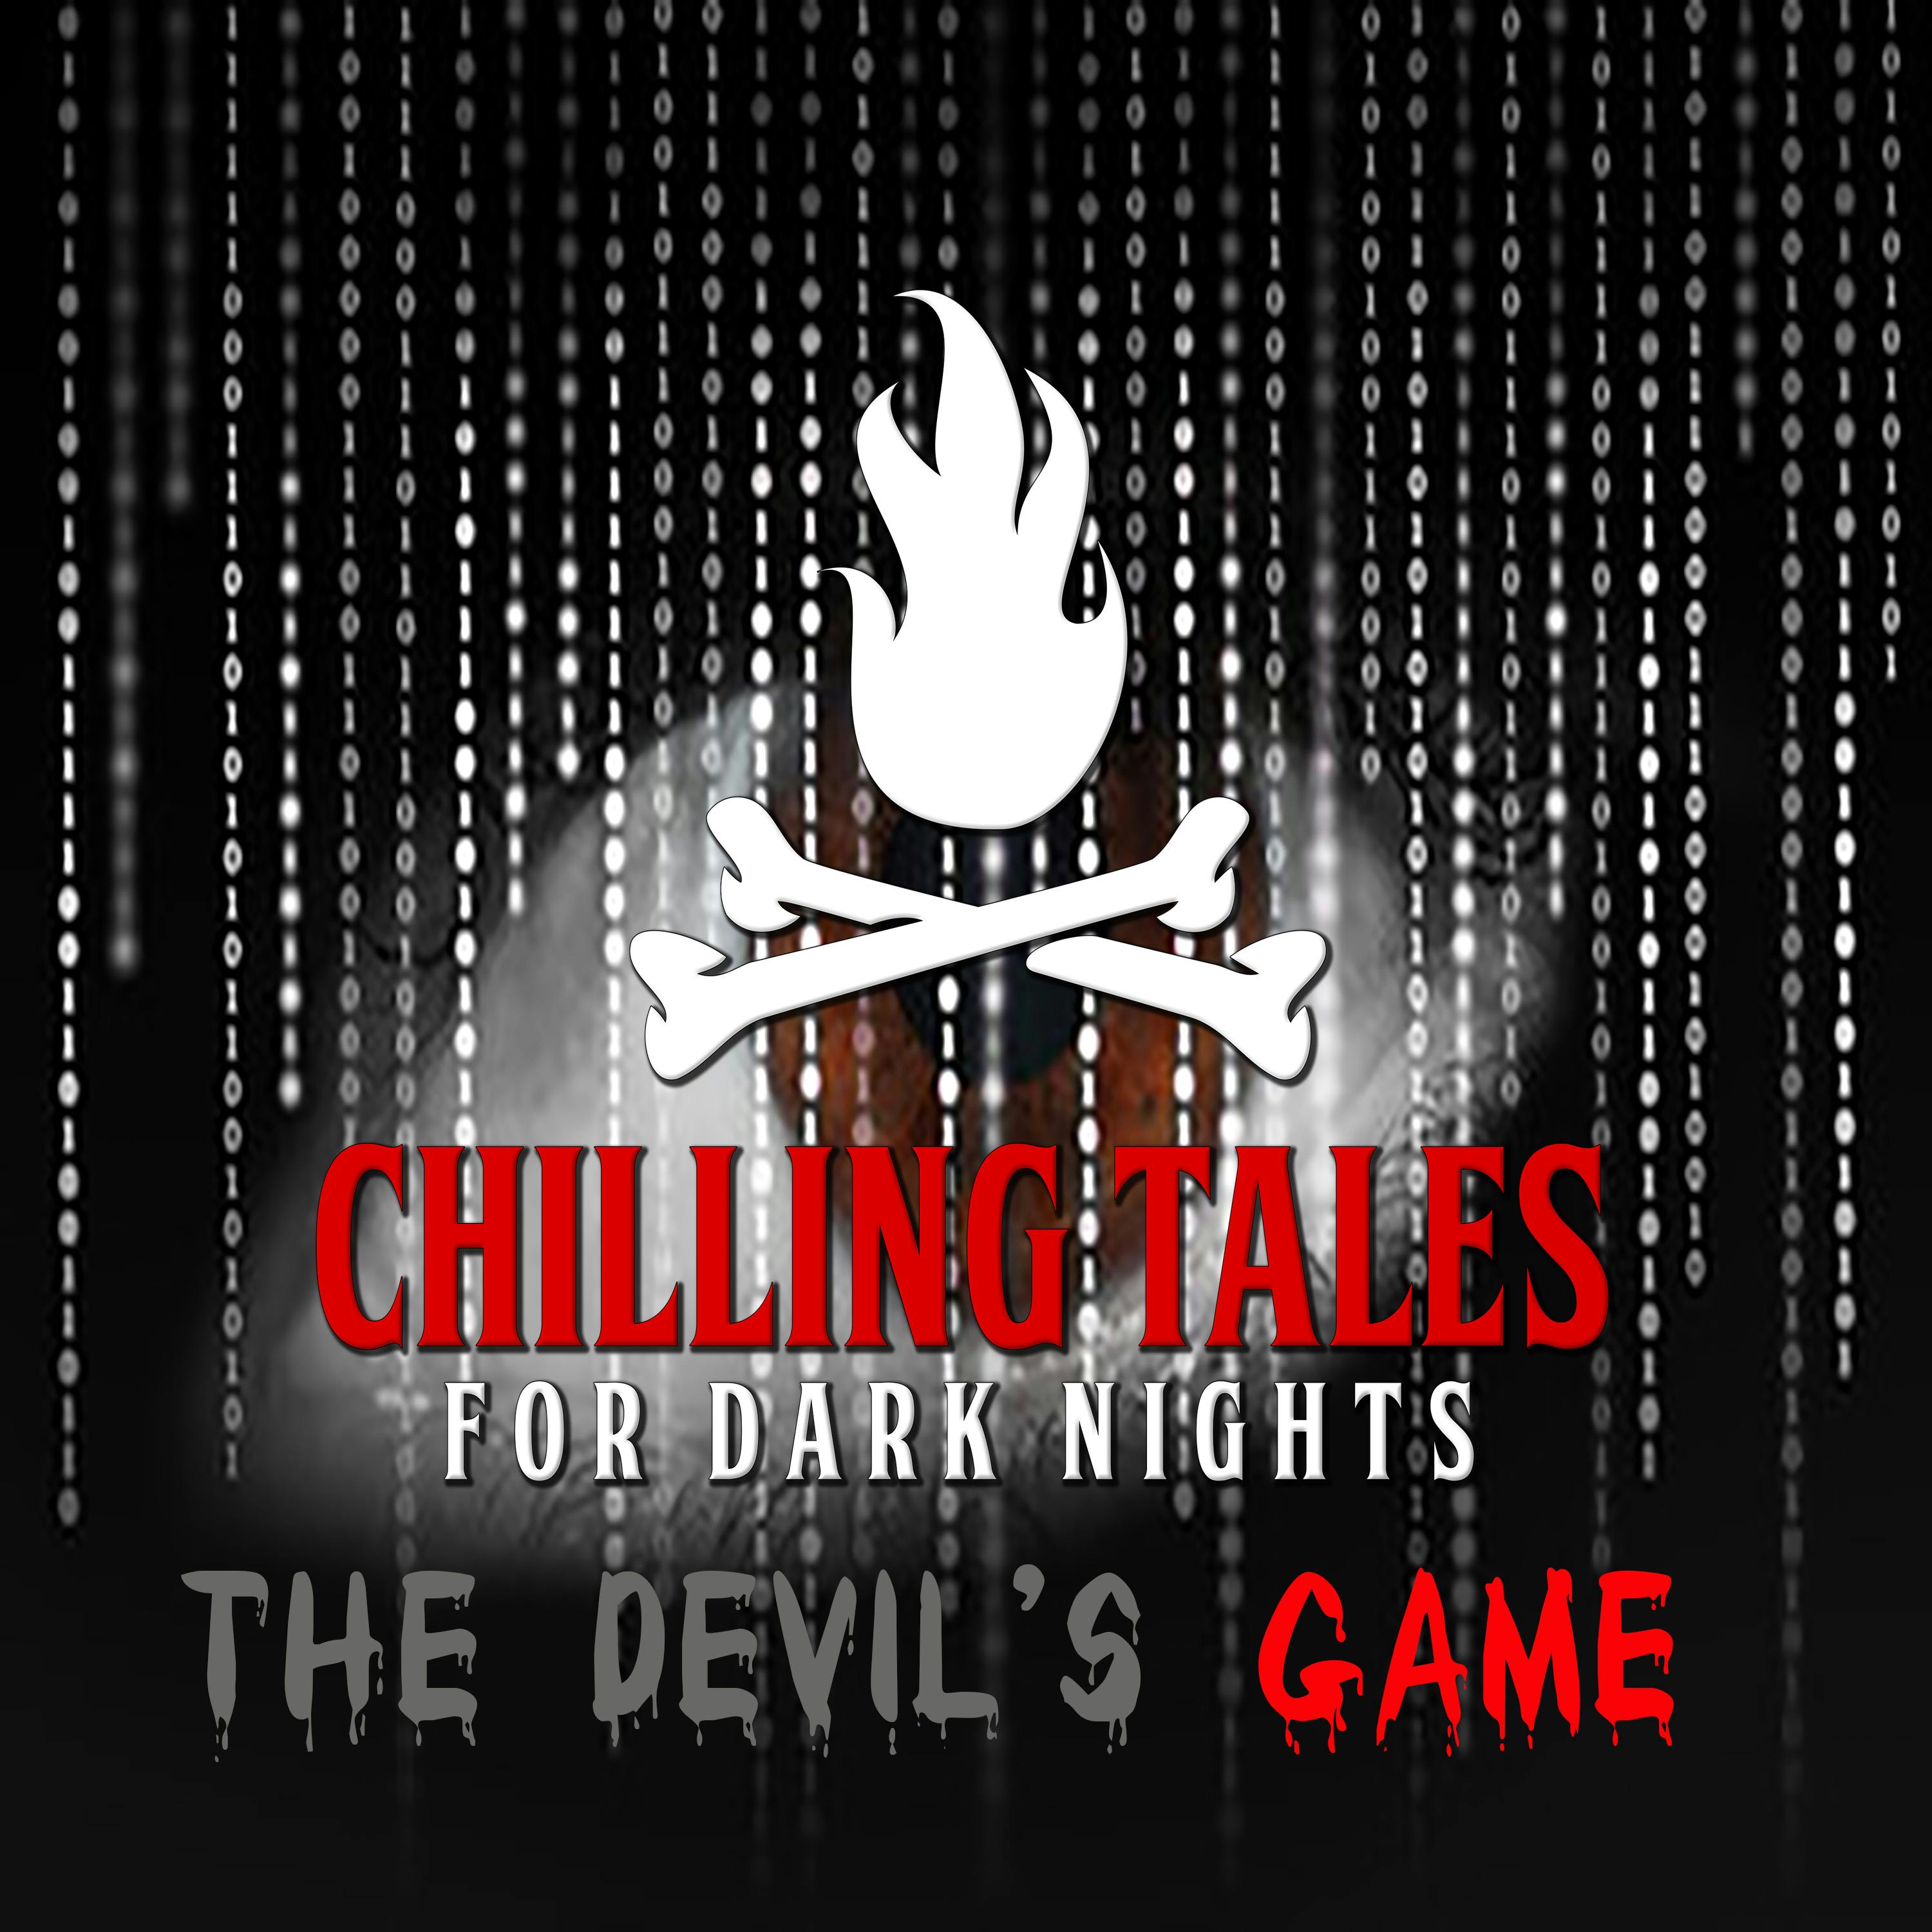 171: The Devil's Game - Chilling Tales for Dark Nights